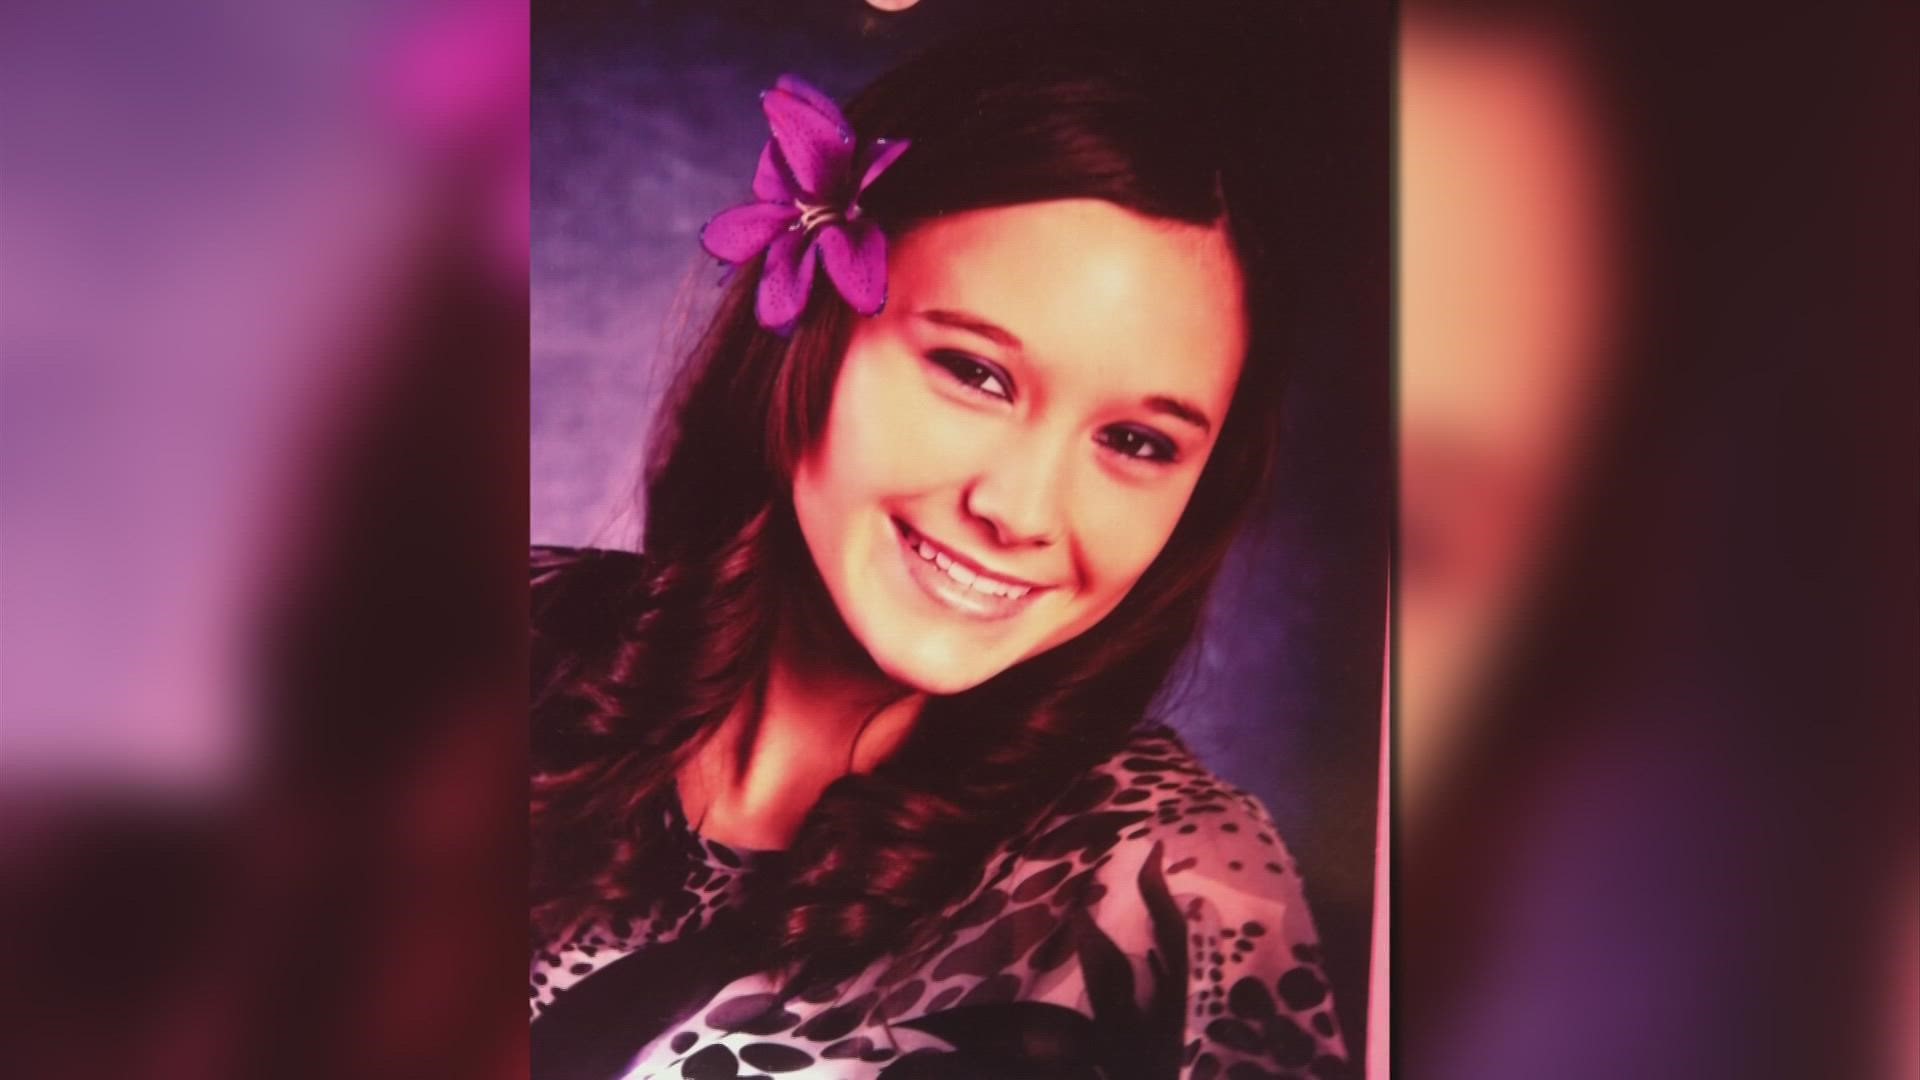 Jenae McNichols was 16 years old when she lost her life.